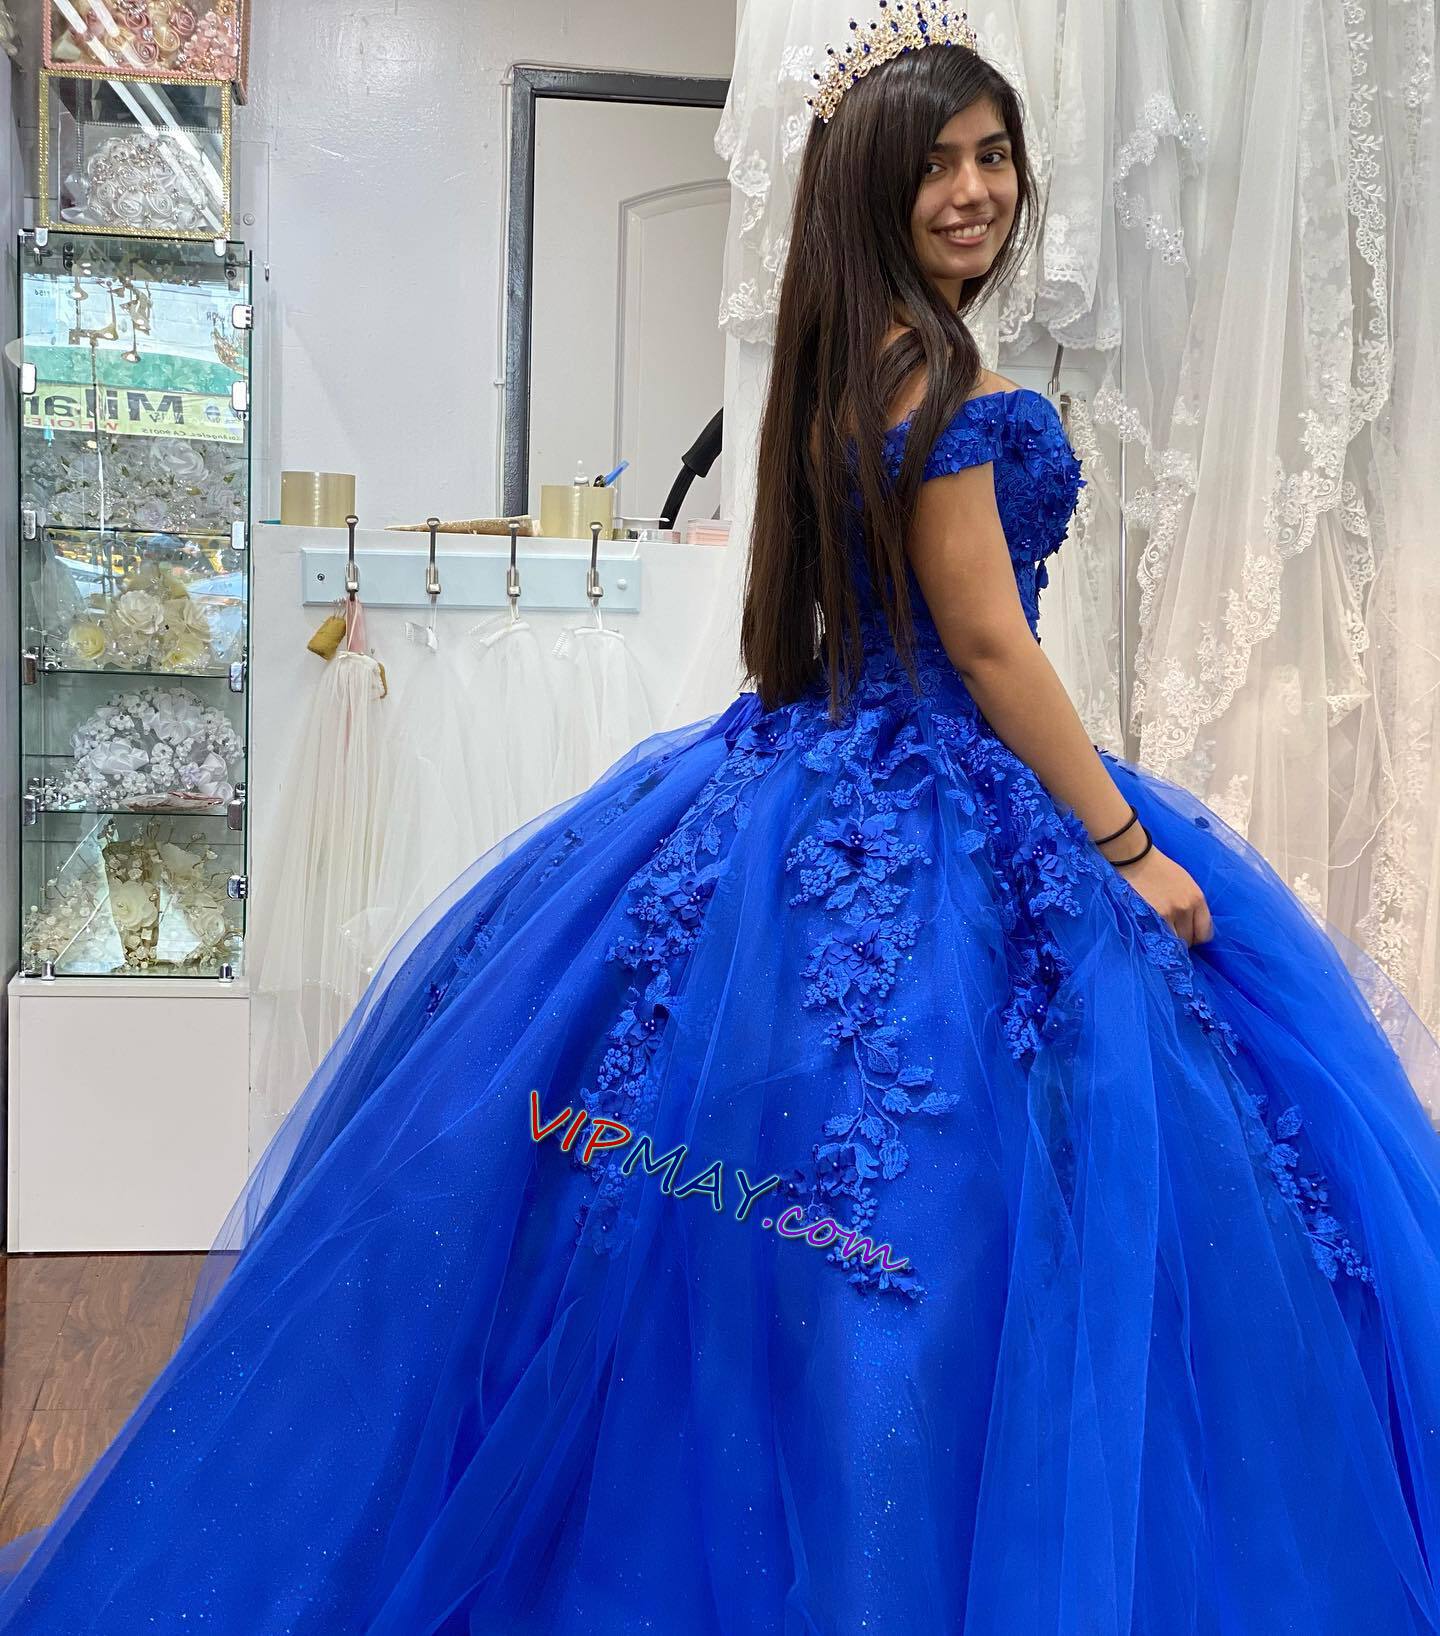 in royal blue quinceanera dress,glitter houston quinceanera dress,glitter tulle quinceanera dress,off shoulder quinceanera dress,quinceanera dress discount prices,puffy quinceanera dress,cheap simple quinceanera dress,